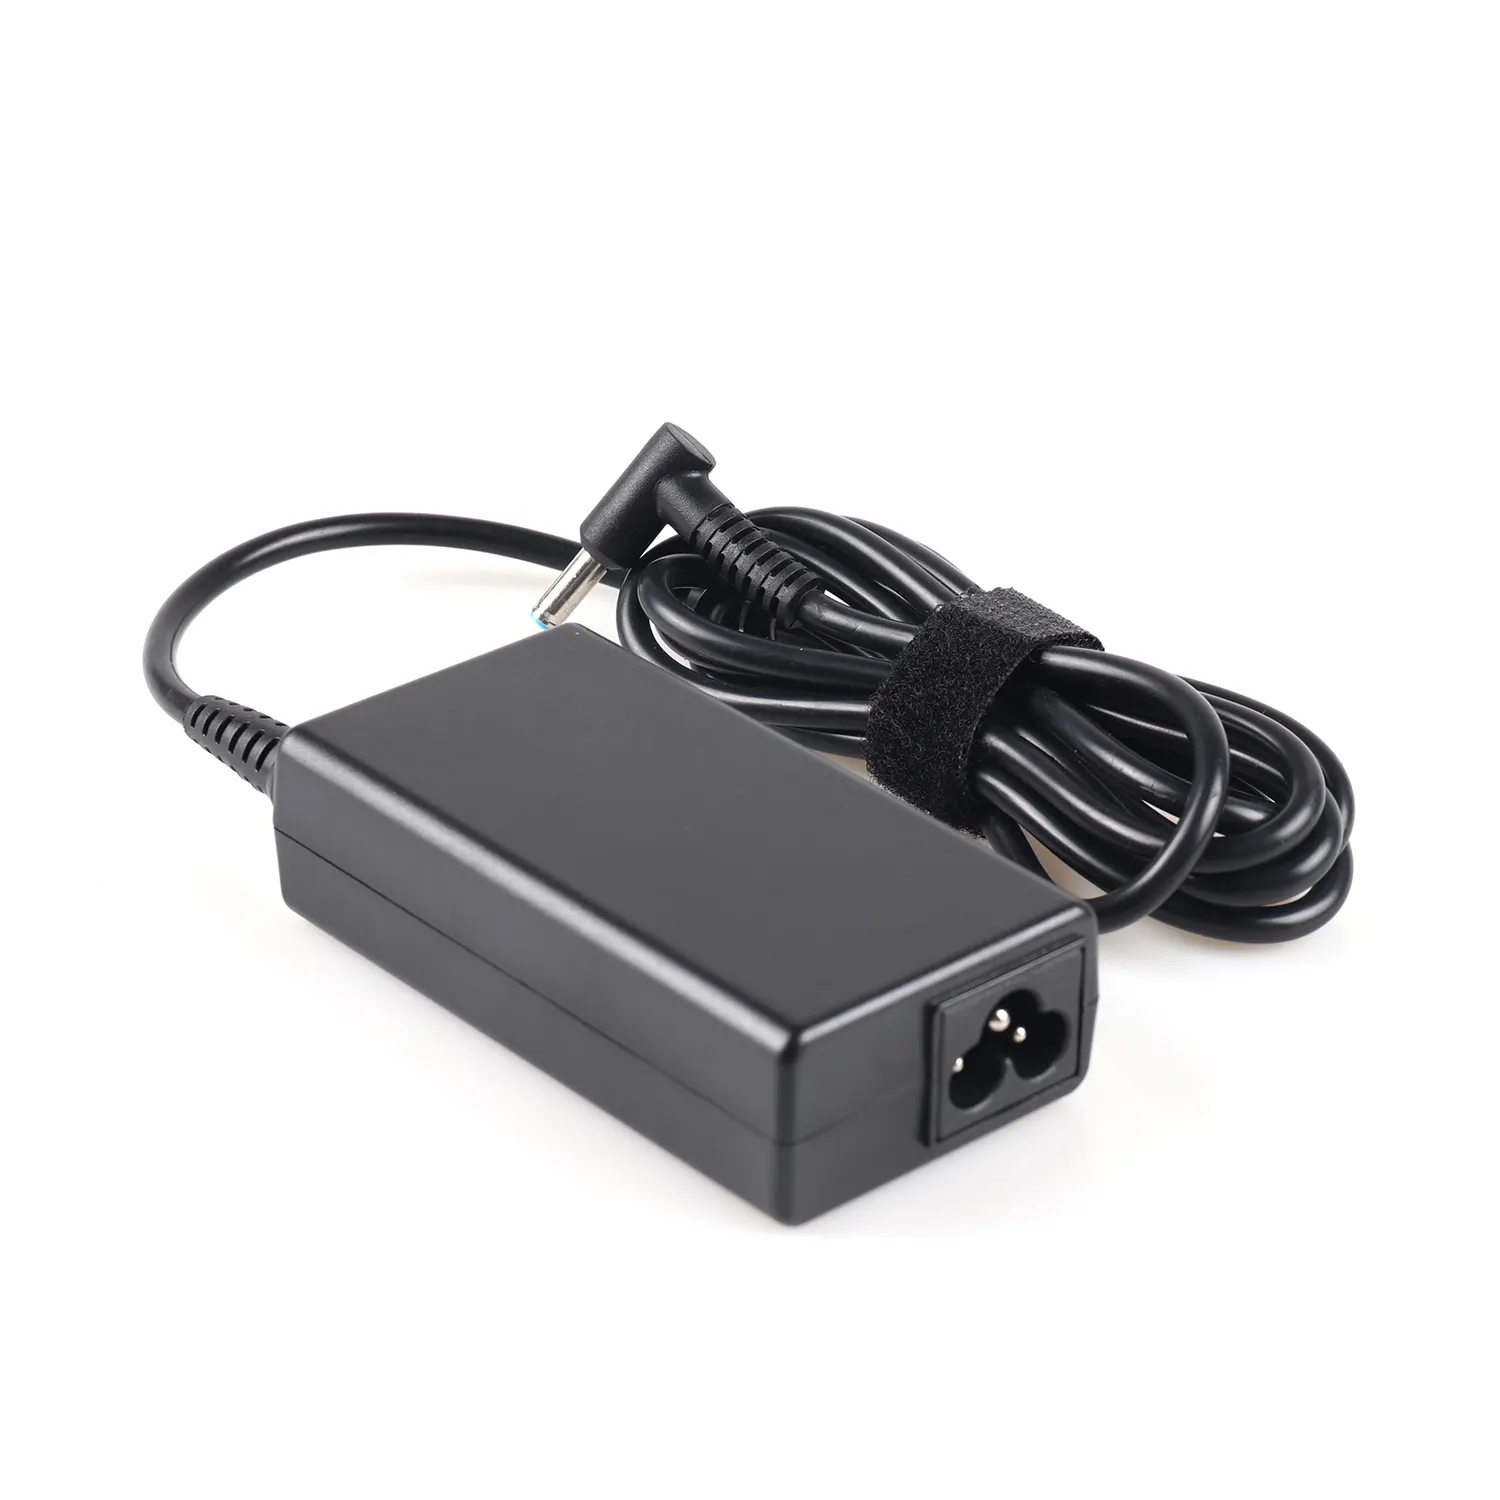 Brand new 19.5V 2.31A 45W Laptop Charger Adapter For HP 4.5x3.0 mm 31213 R35737 NSW26097 Laptop Power Supply Charger